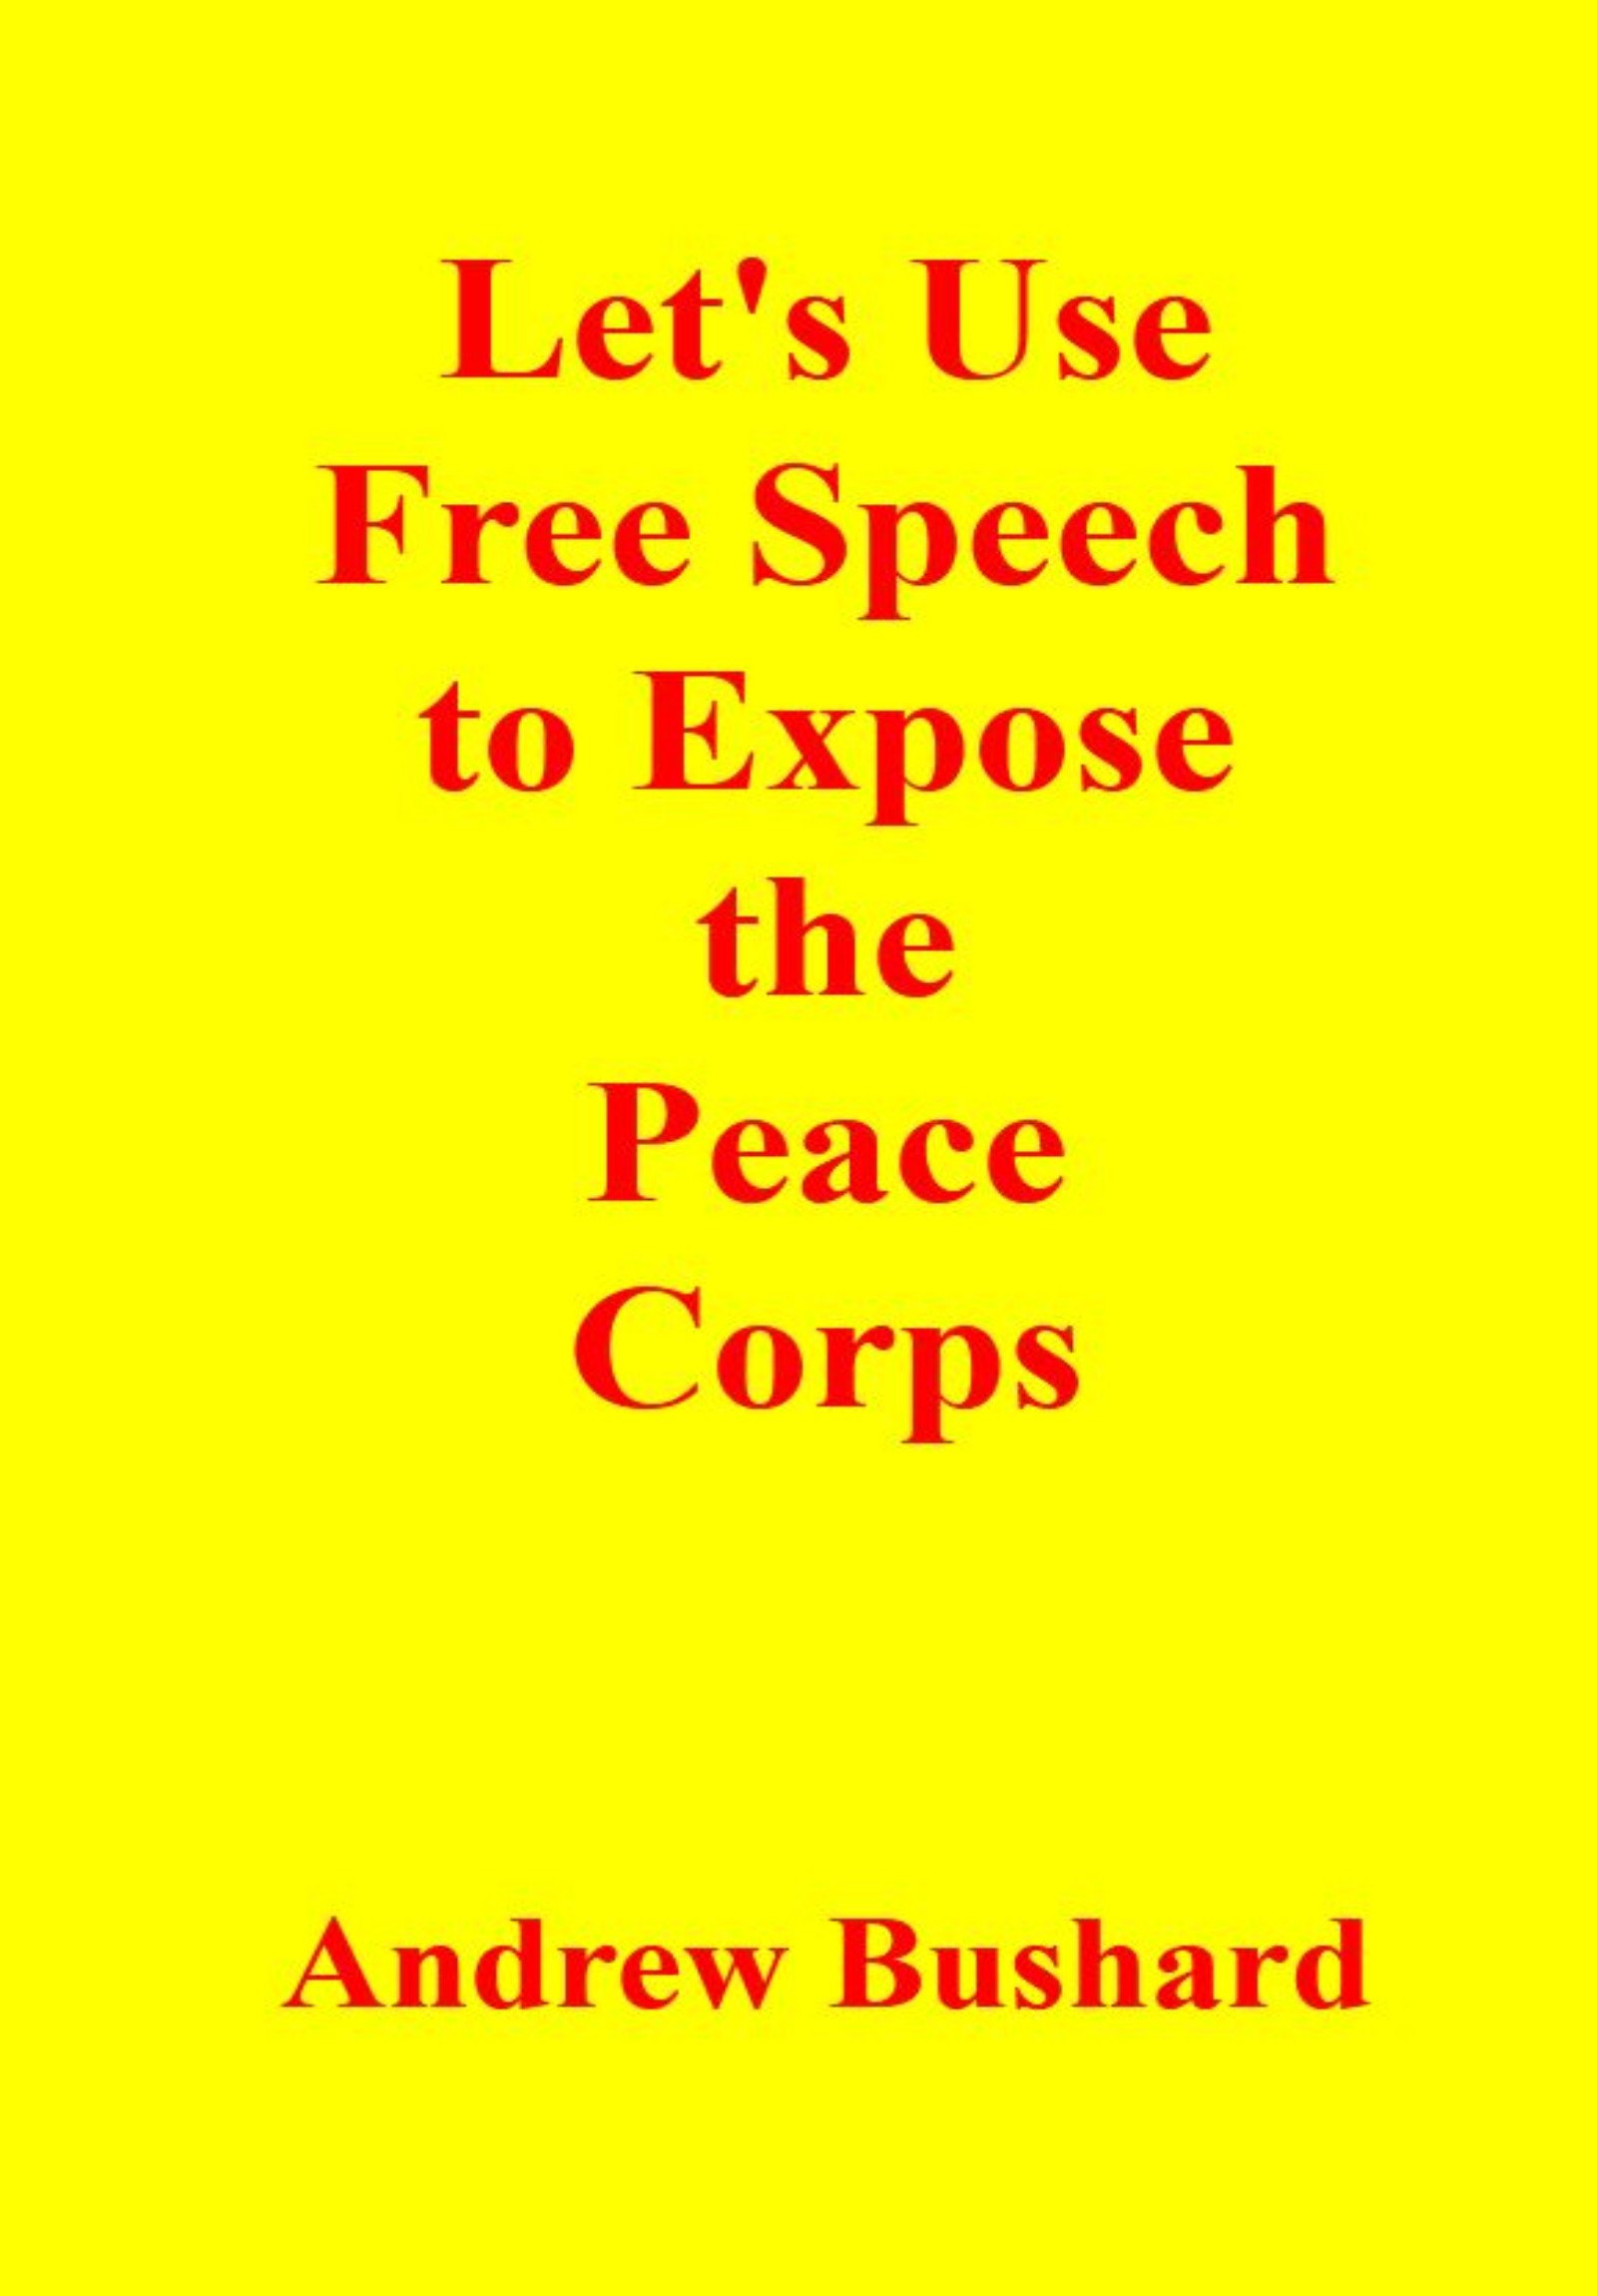 Let's Use Free Speech to Expose the Peace Corps